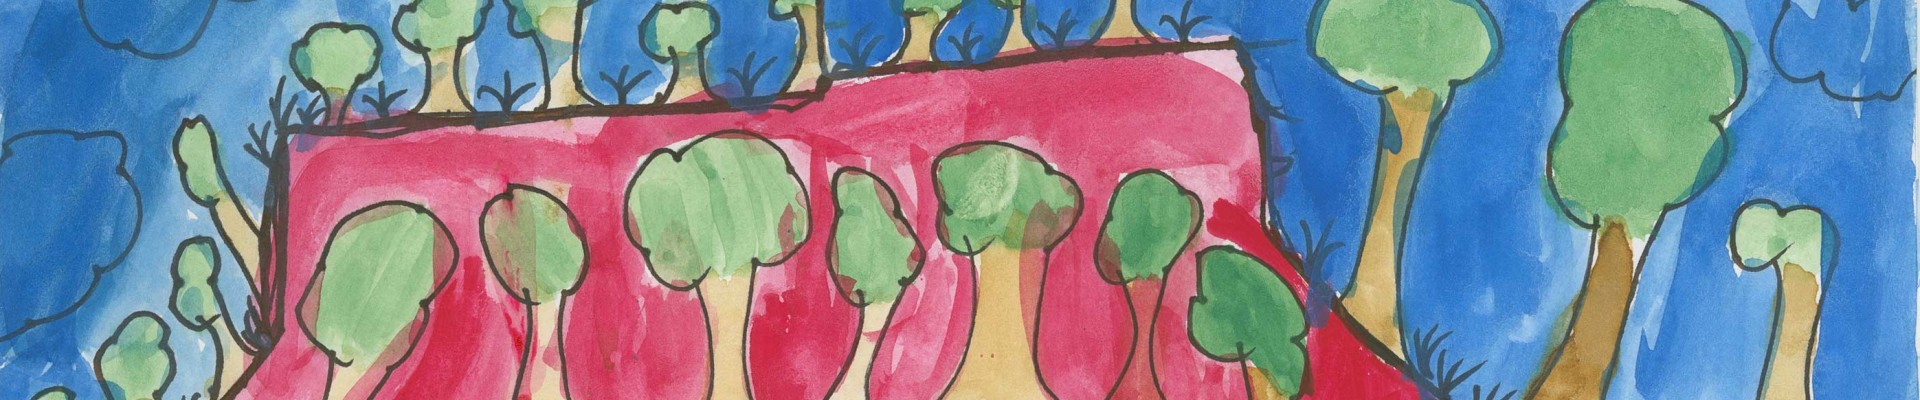 Childs artwork of trees with a virbrant colour